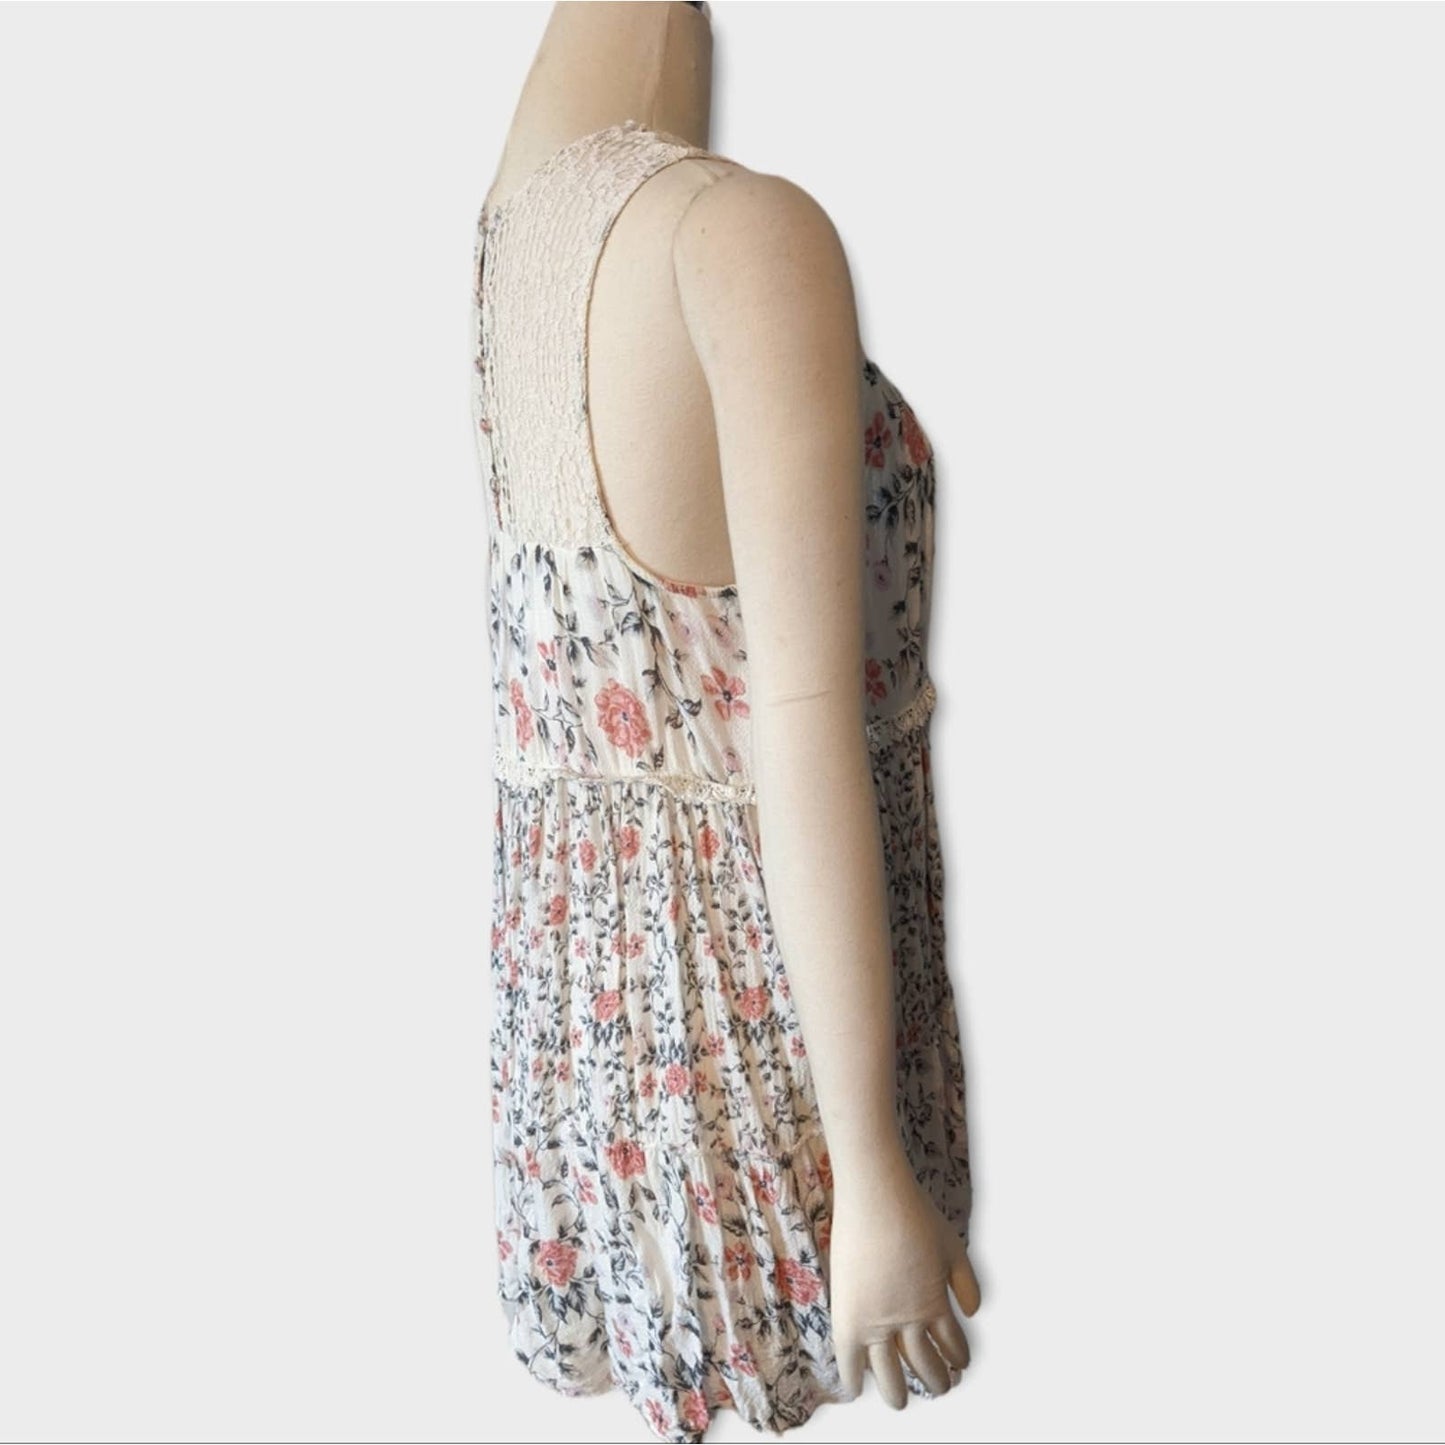 BLUE RAIN Cream Floral Tiered Dress with Lace Shoulder Medium